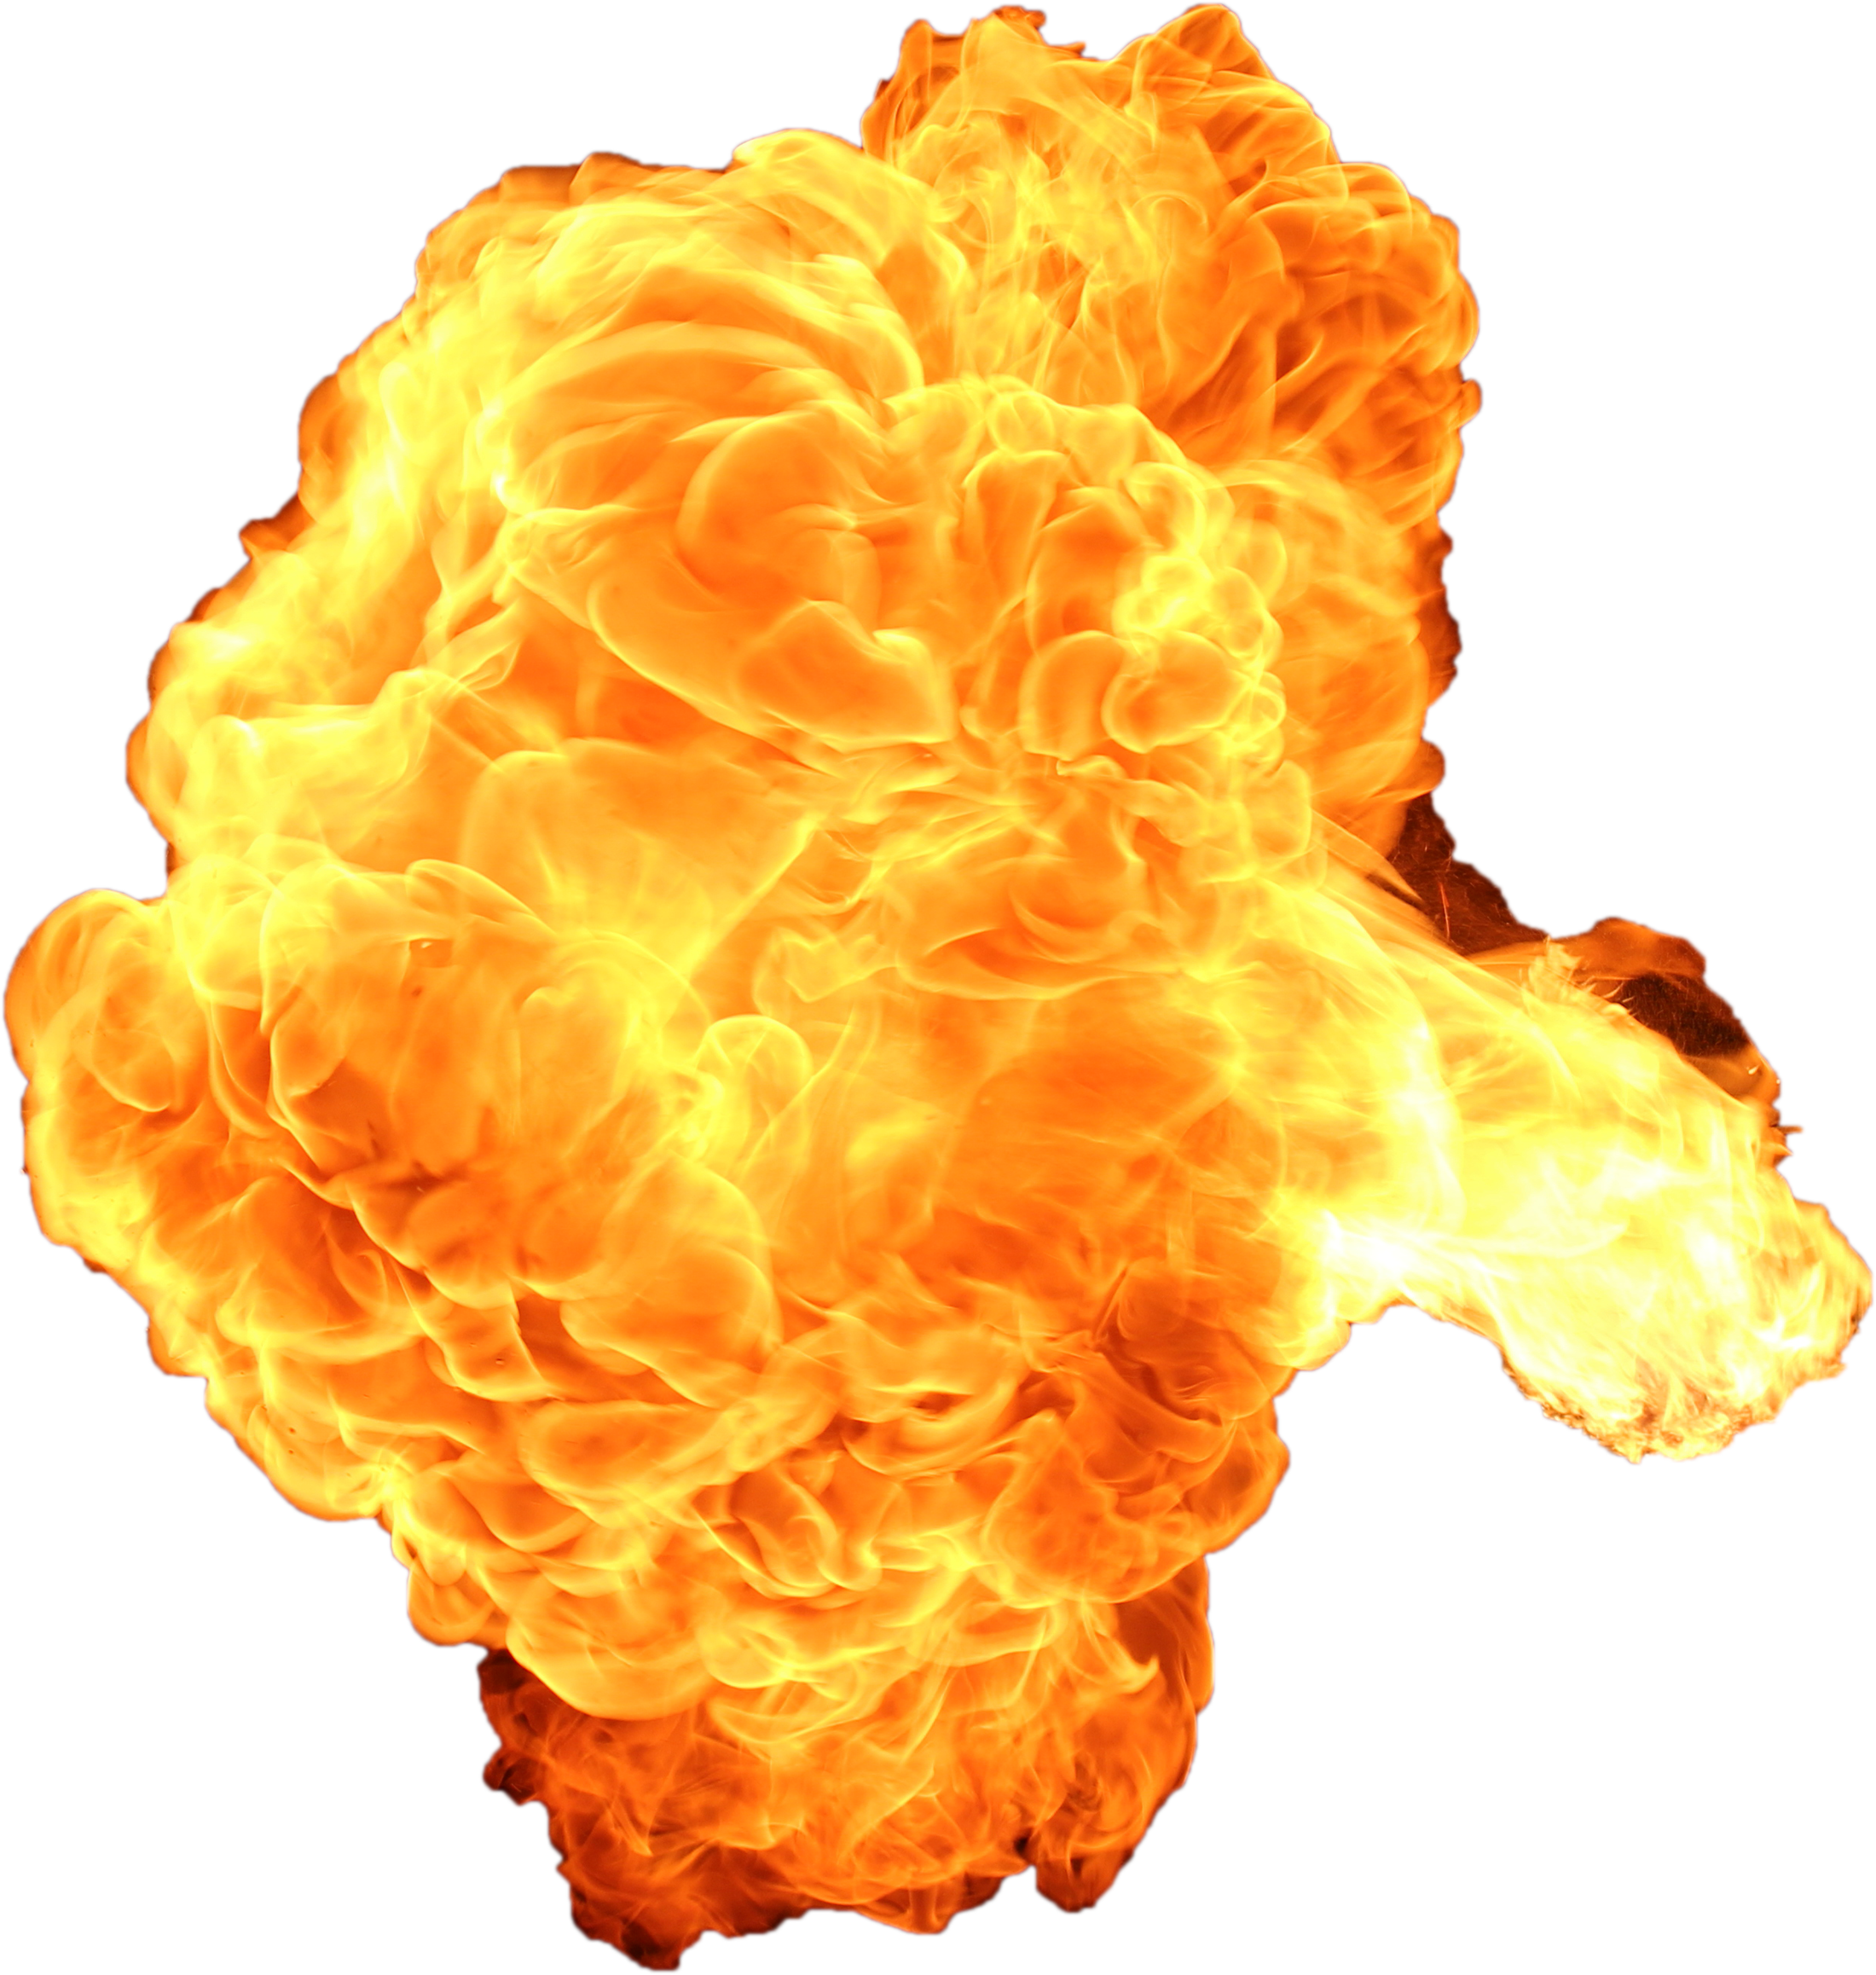 Giant Hot Firebomb Explosion PNG Image